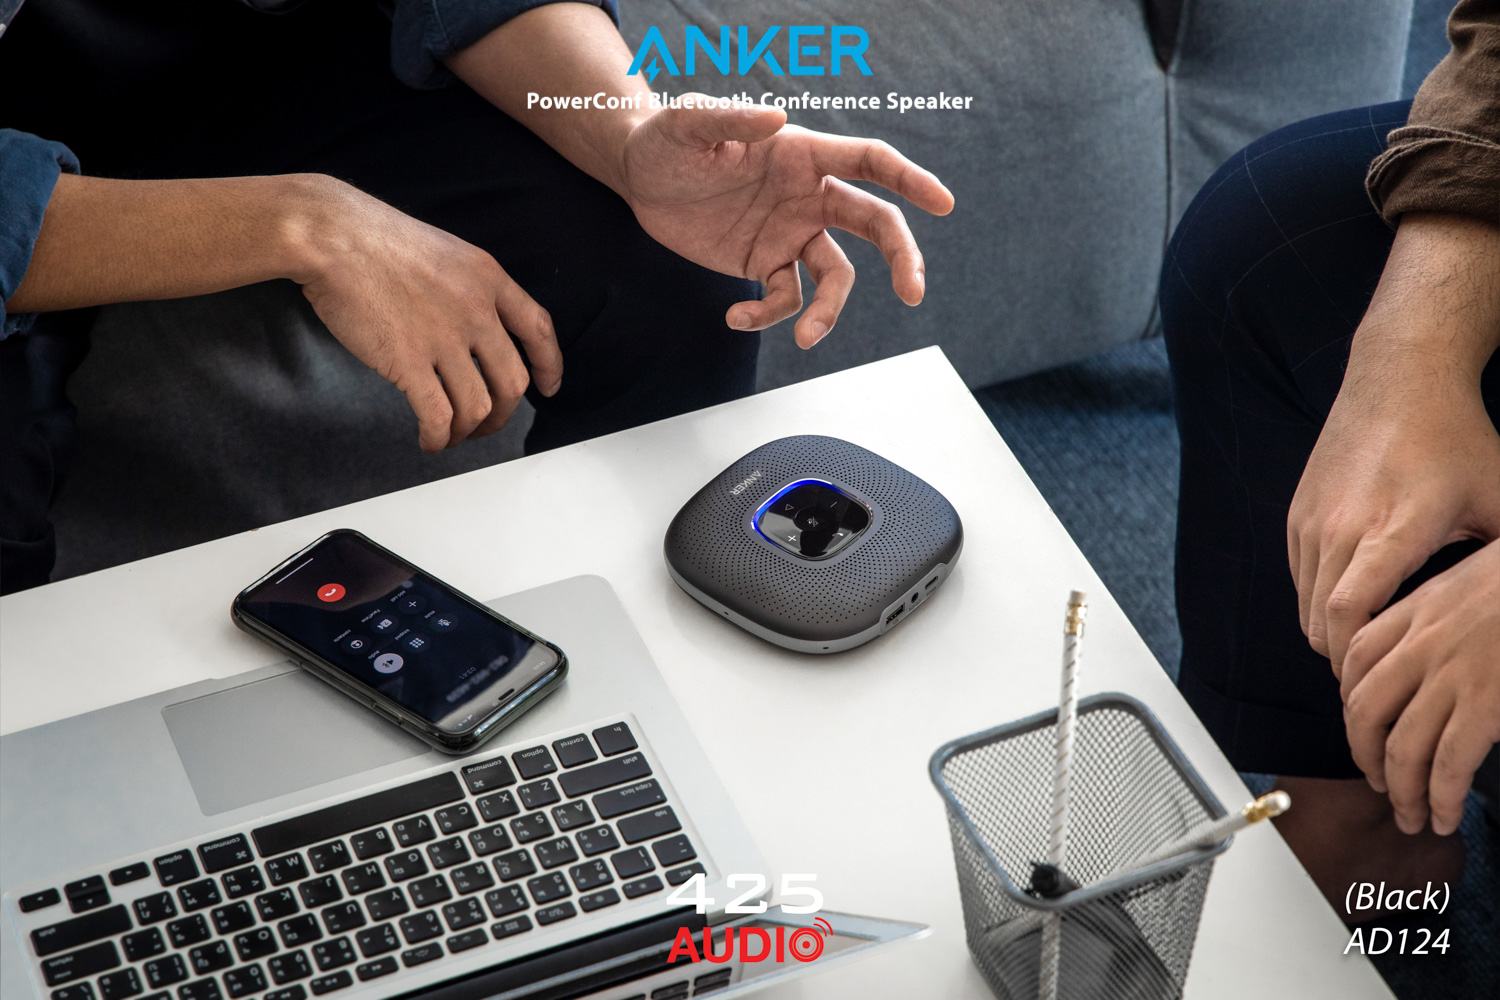 Anker PowerConf Bluetooth Conference Speaker